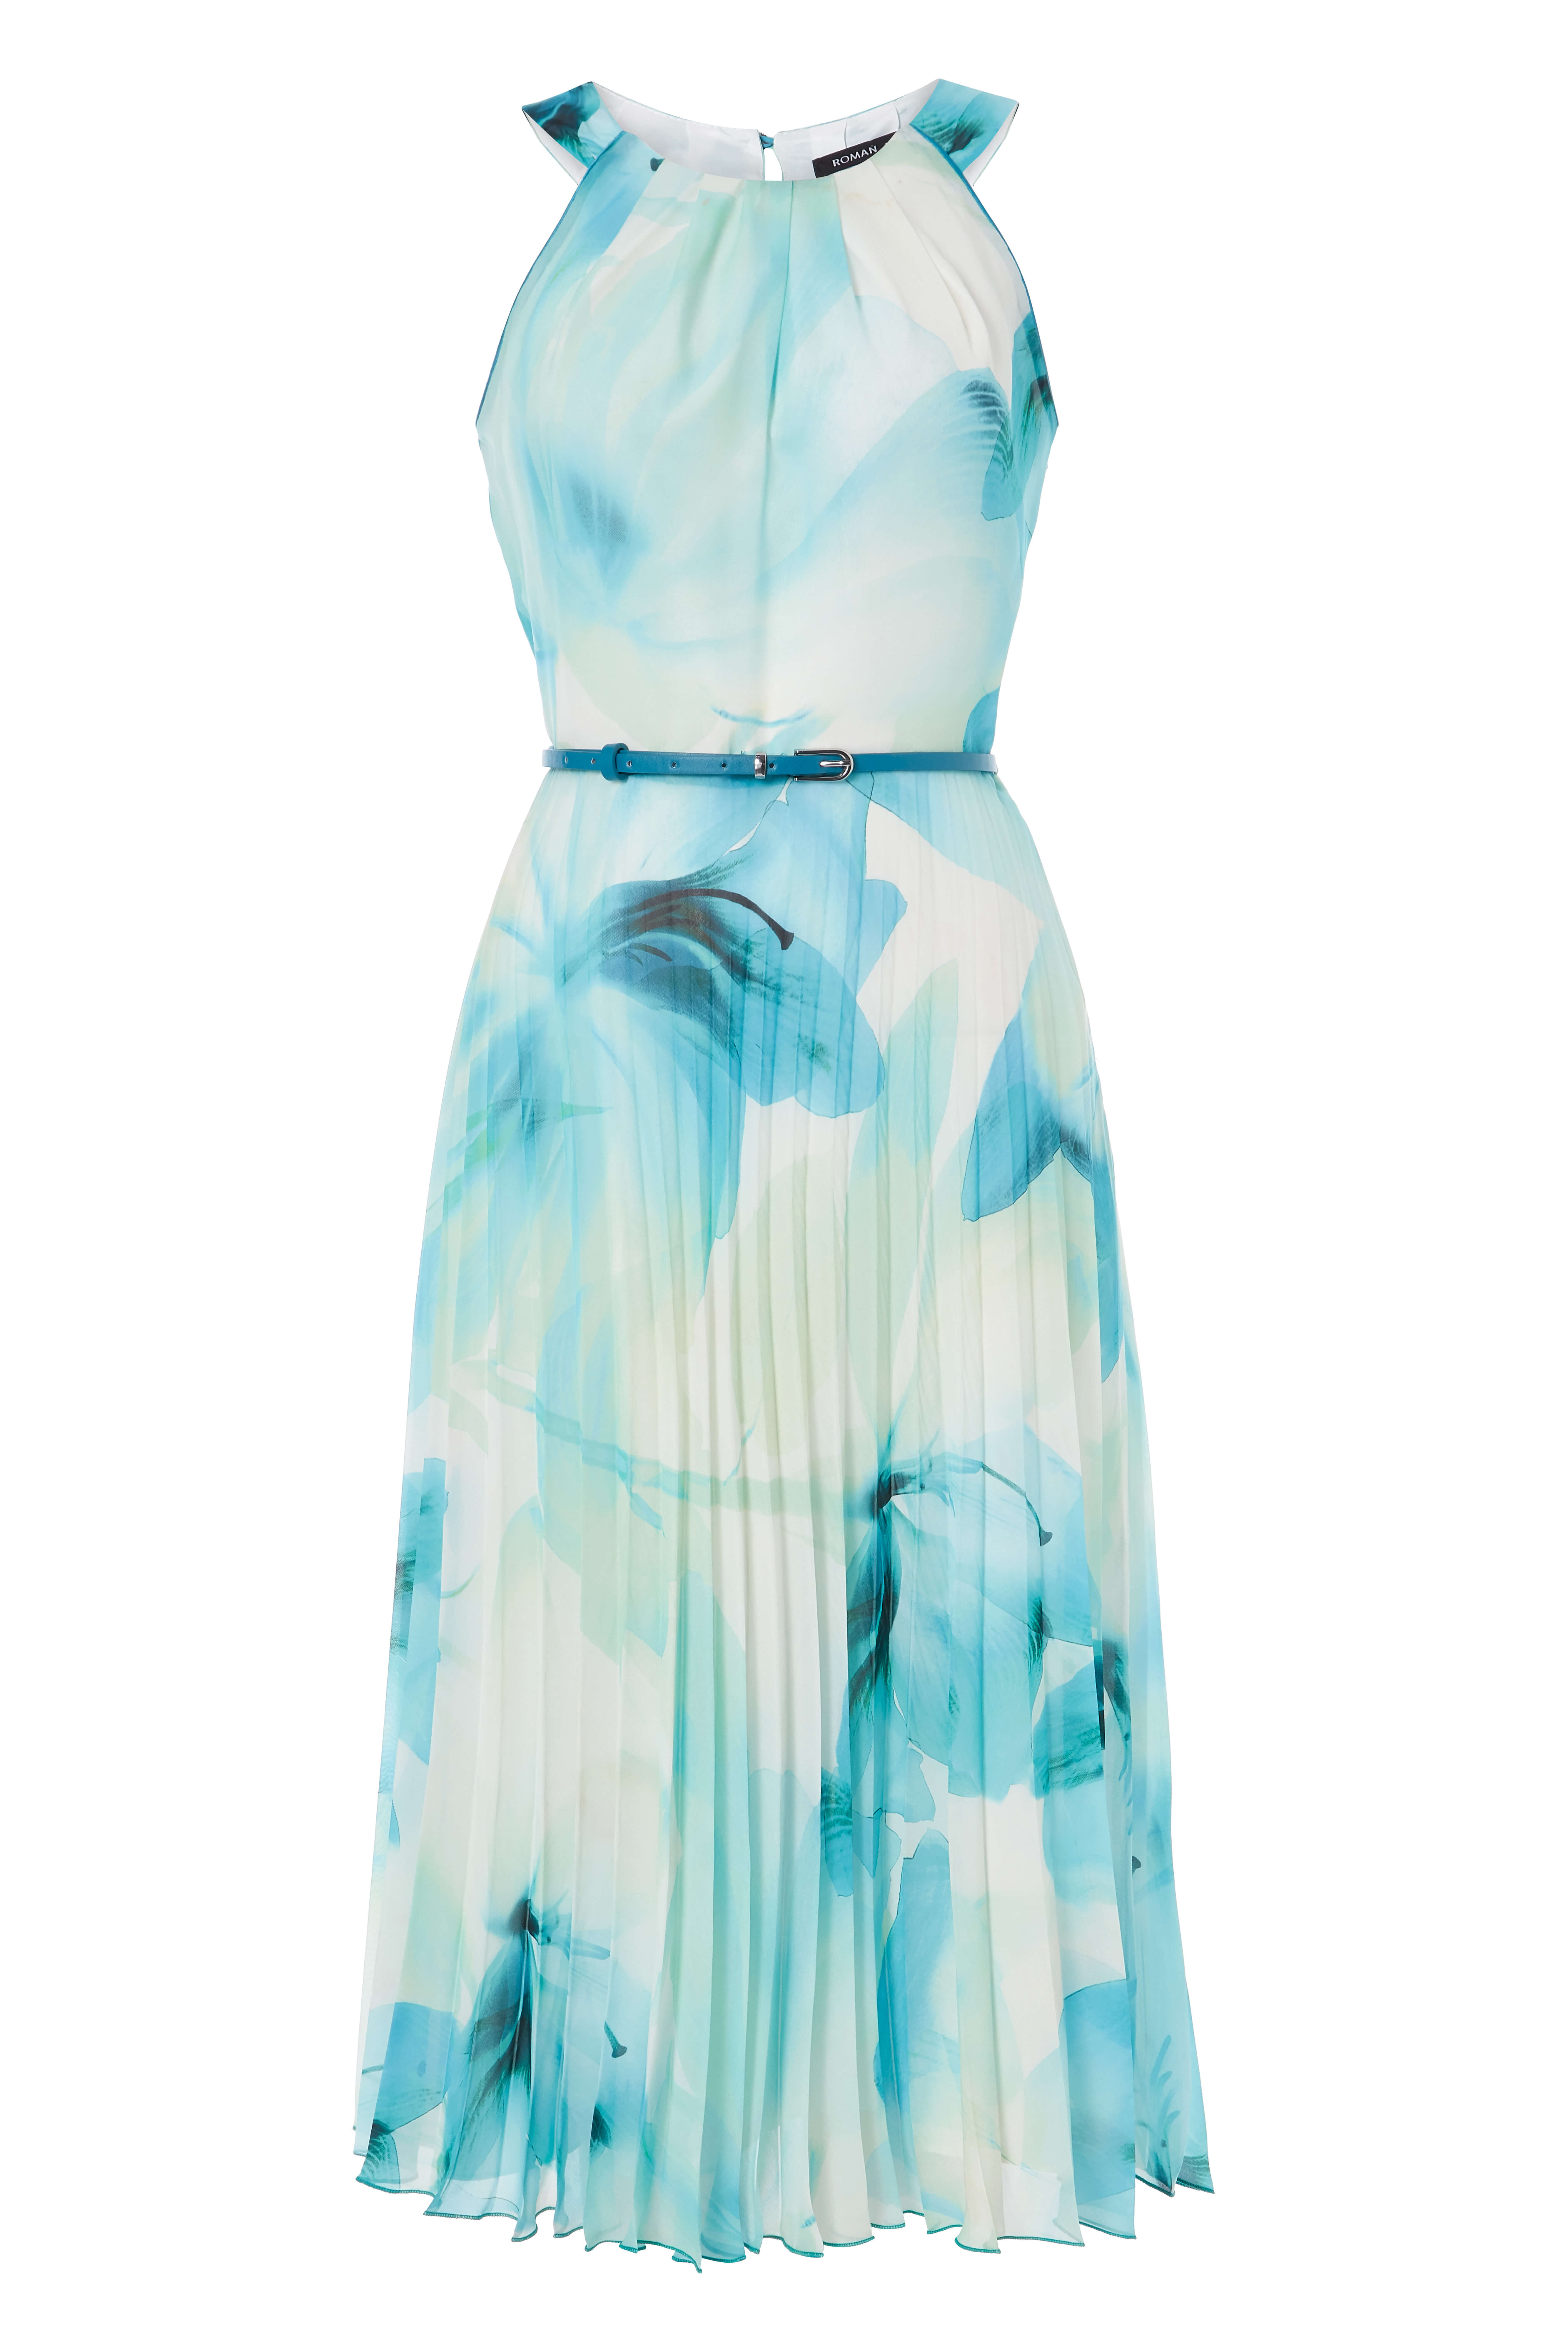 Green Floral Print Pleated Midi Dress, Image 5 of 5